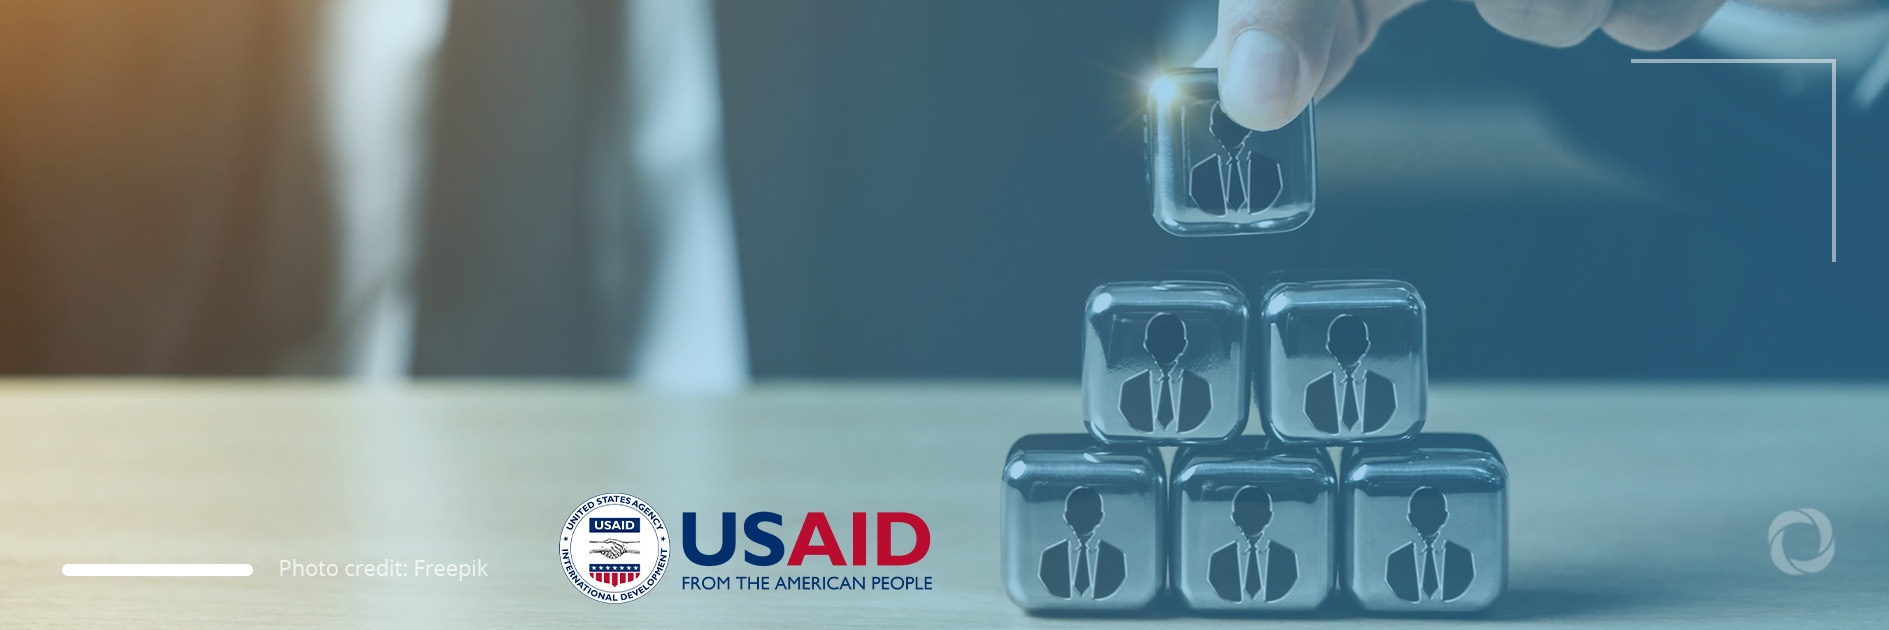 Top six USAID contractors in 2021